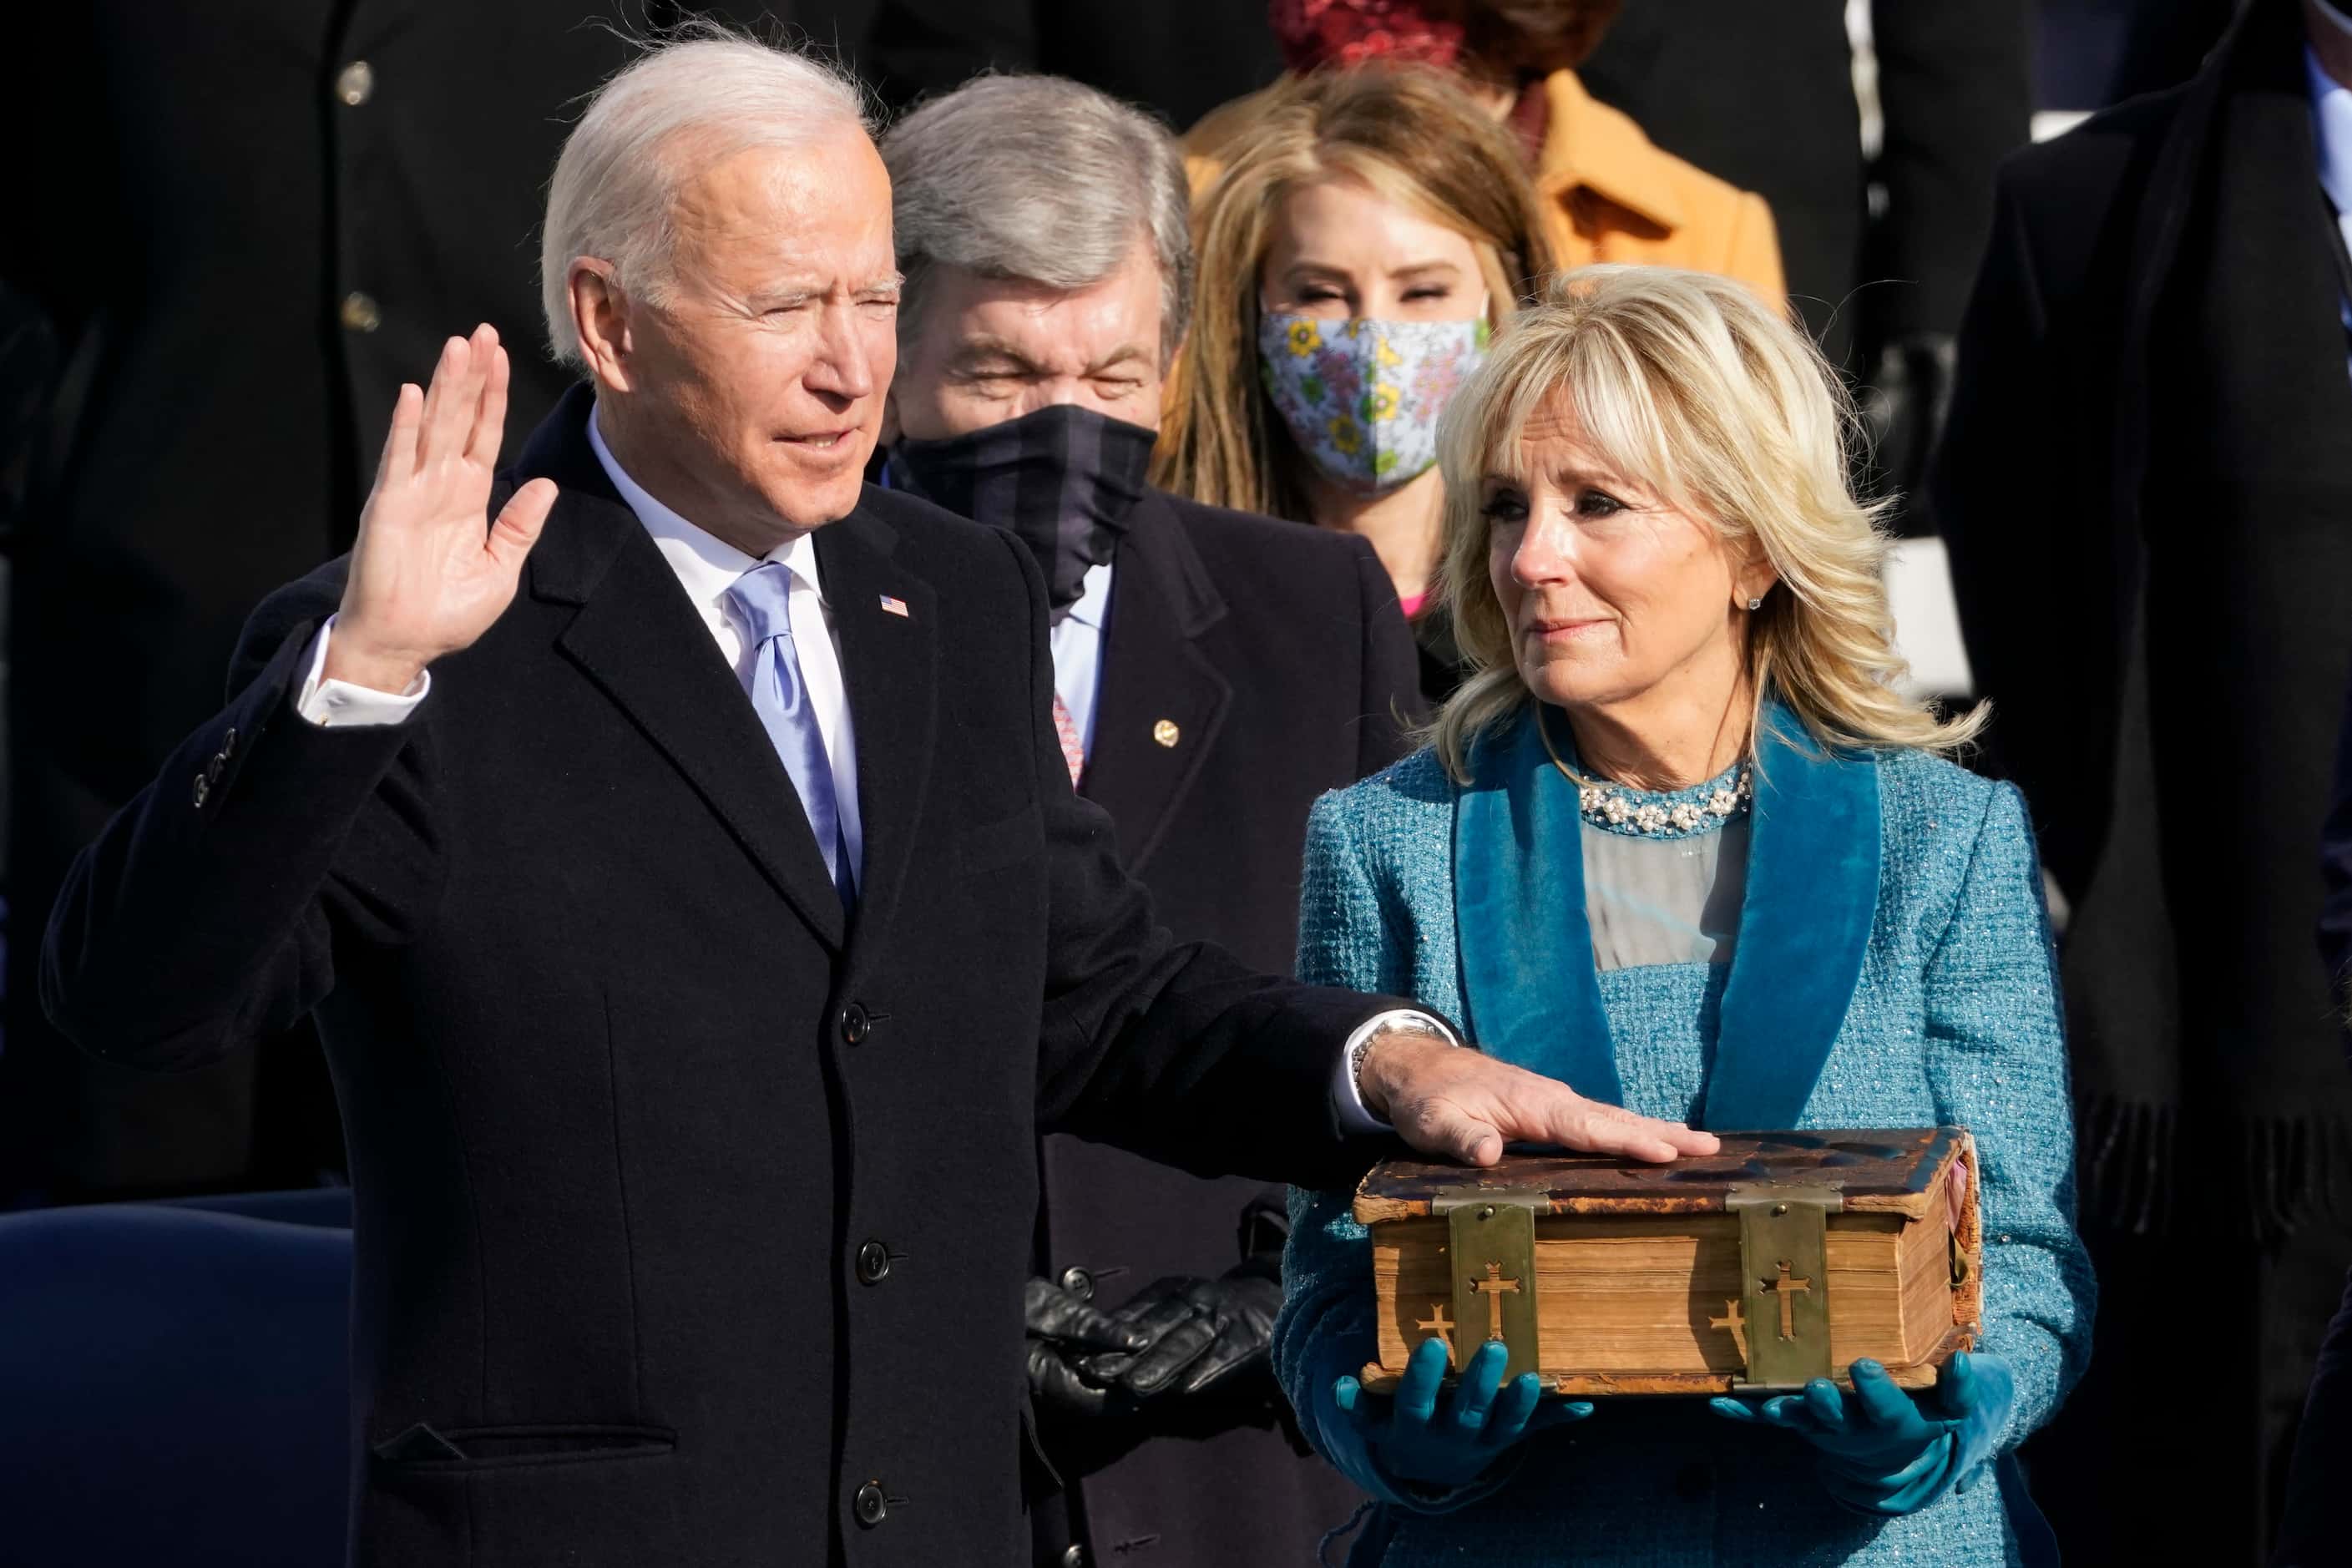 Joe Biden is sworn in as the 46th president of the United States by Chief Justice John...